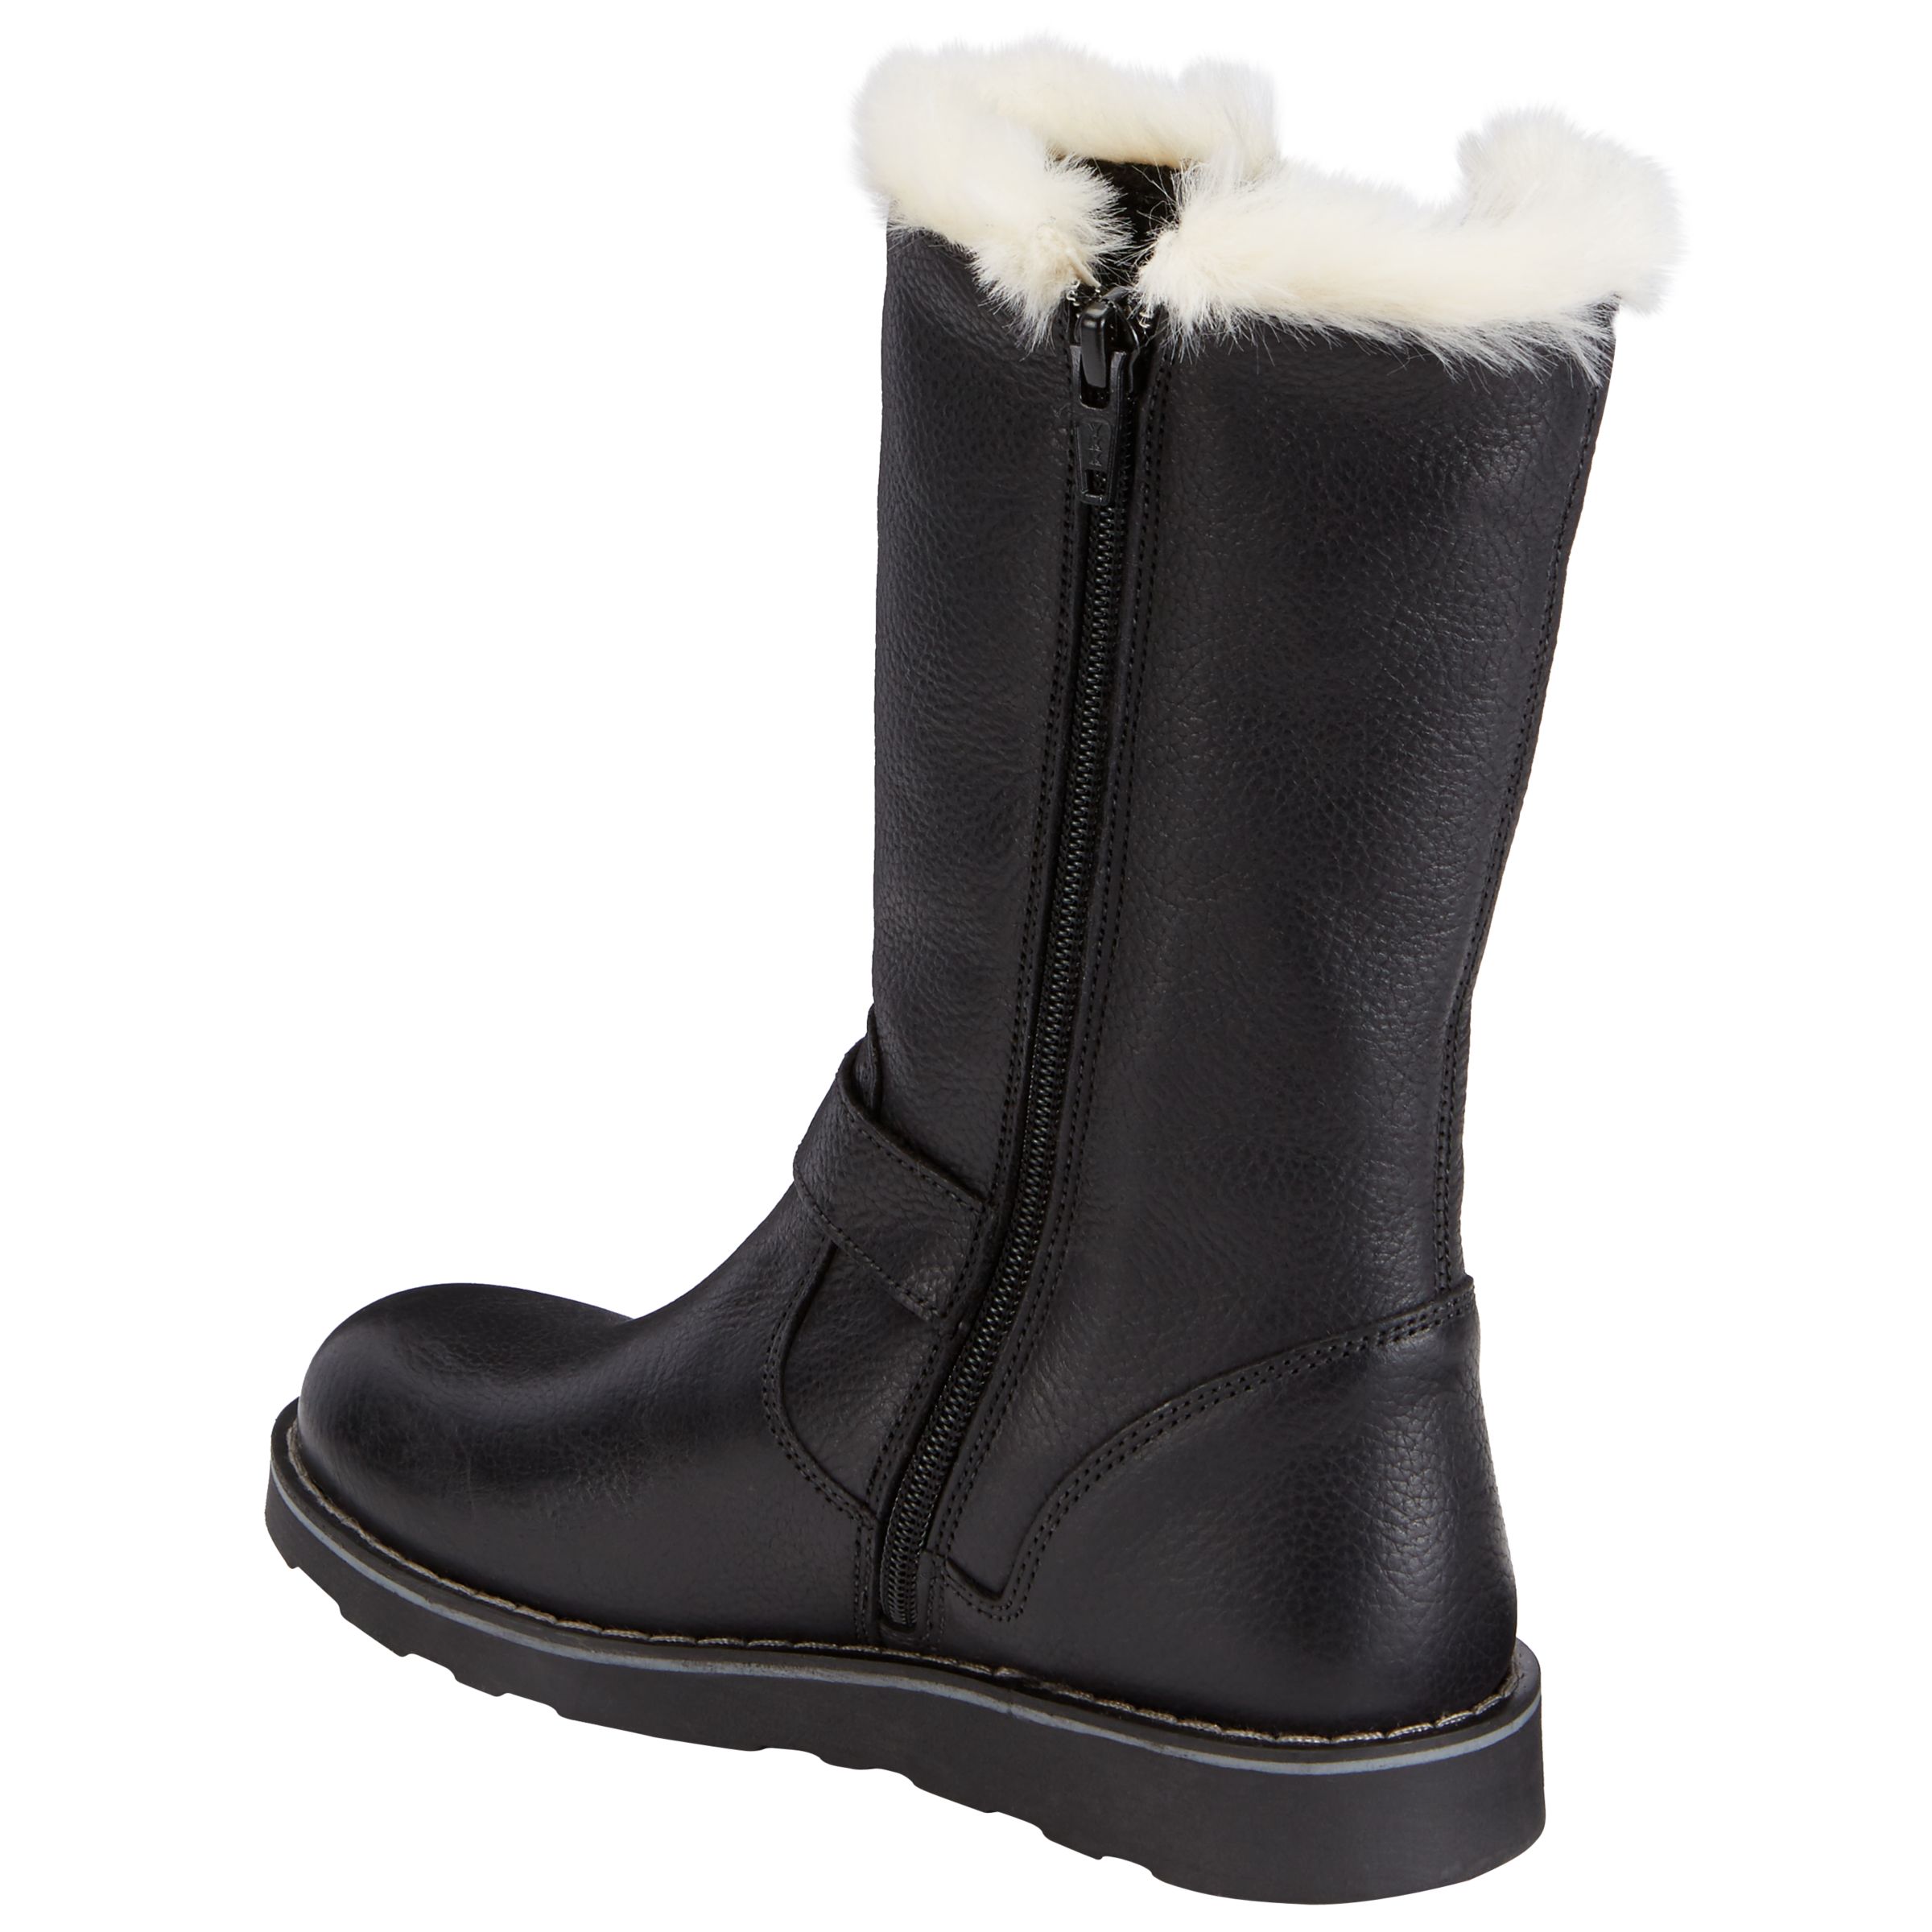 John Lewis & Partners Children&#39;s Leia Shearling Boots, Black Leather at John Lewis & Partners